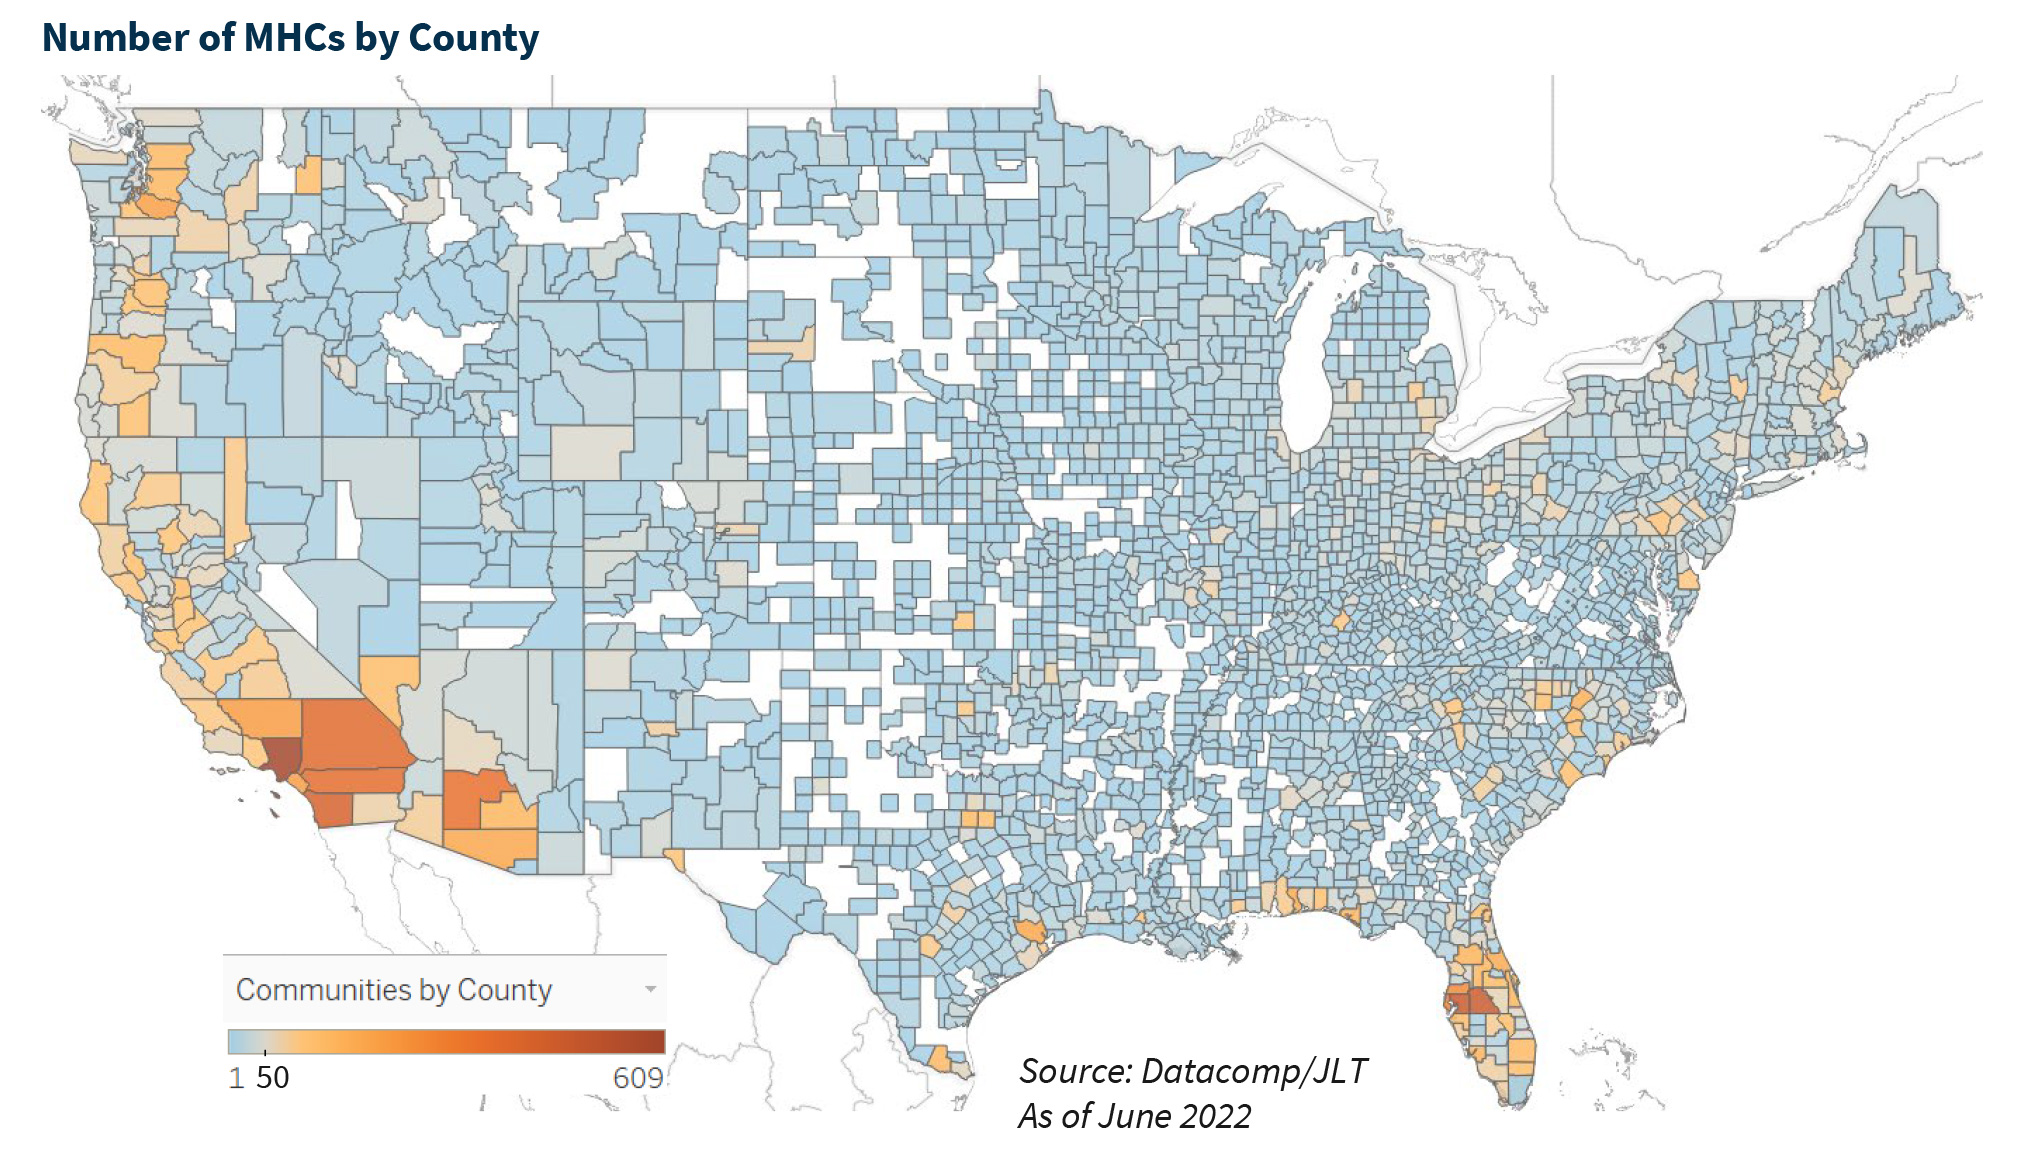 Number of MHCs by County